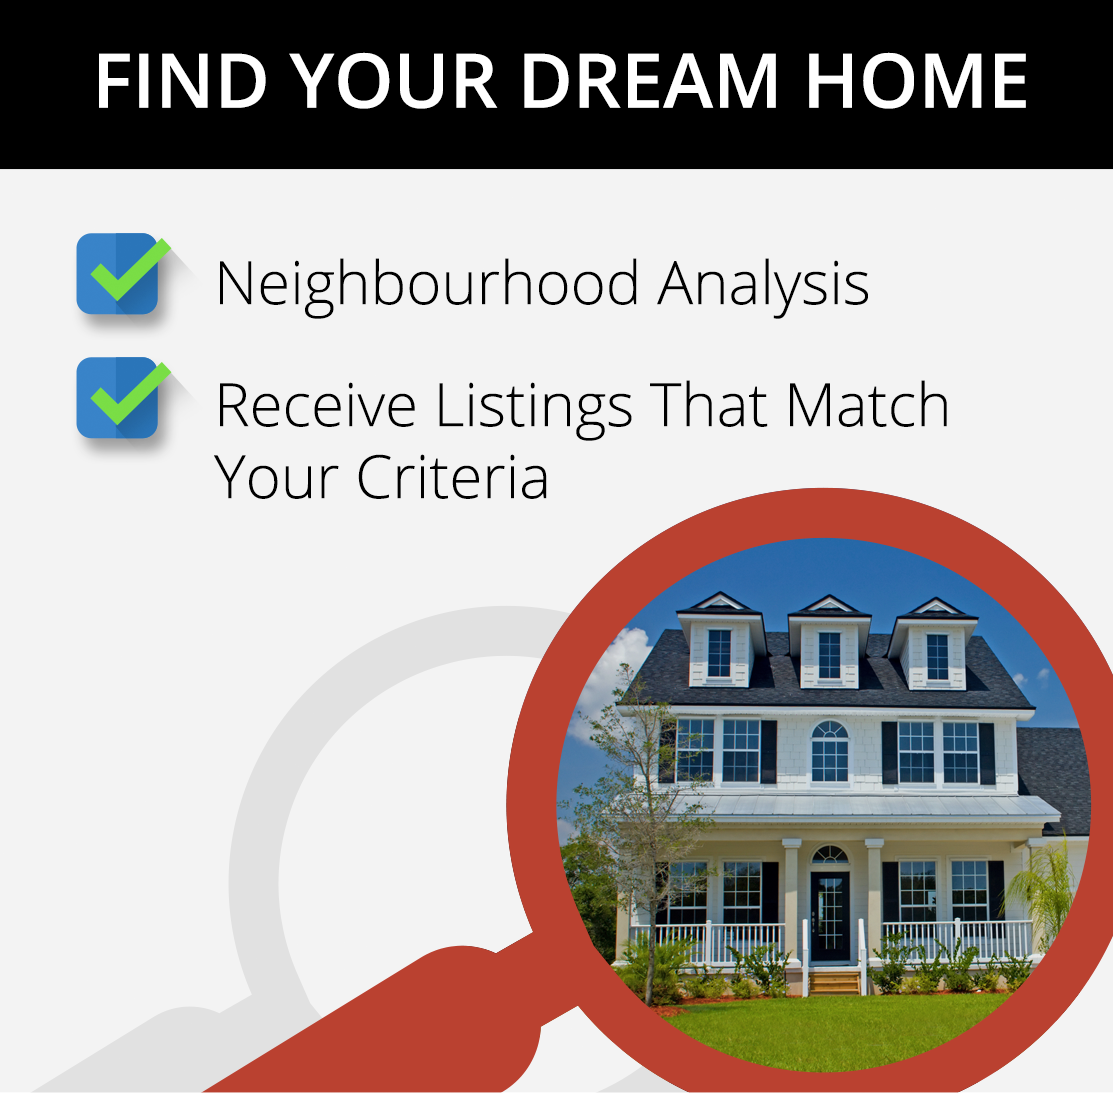 Receive Listings That Match Your Criteria